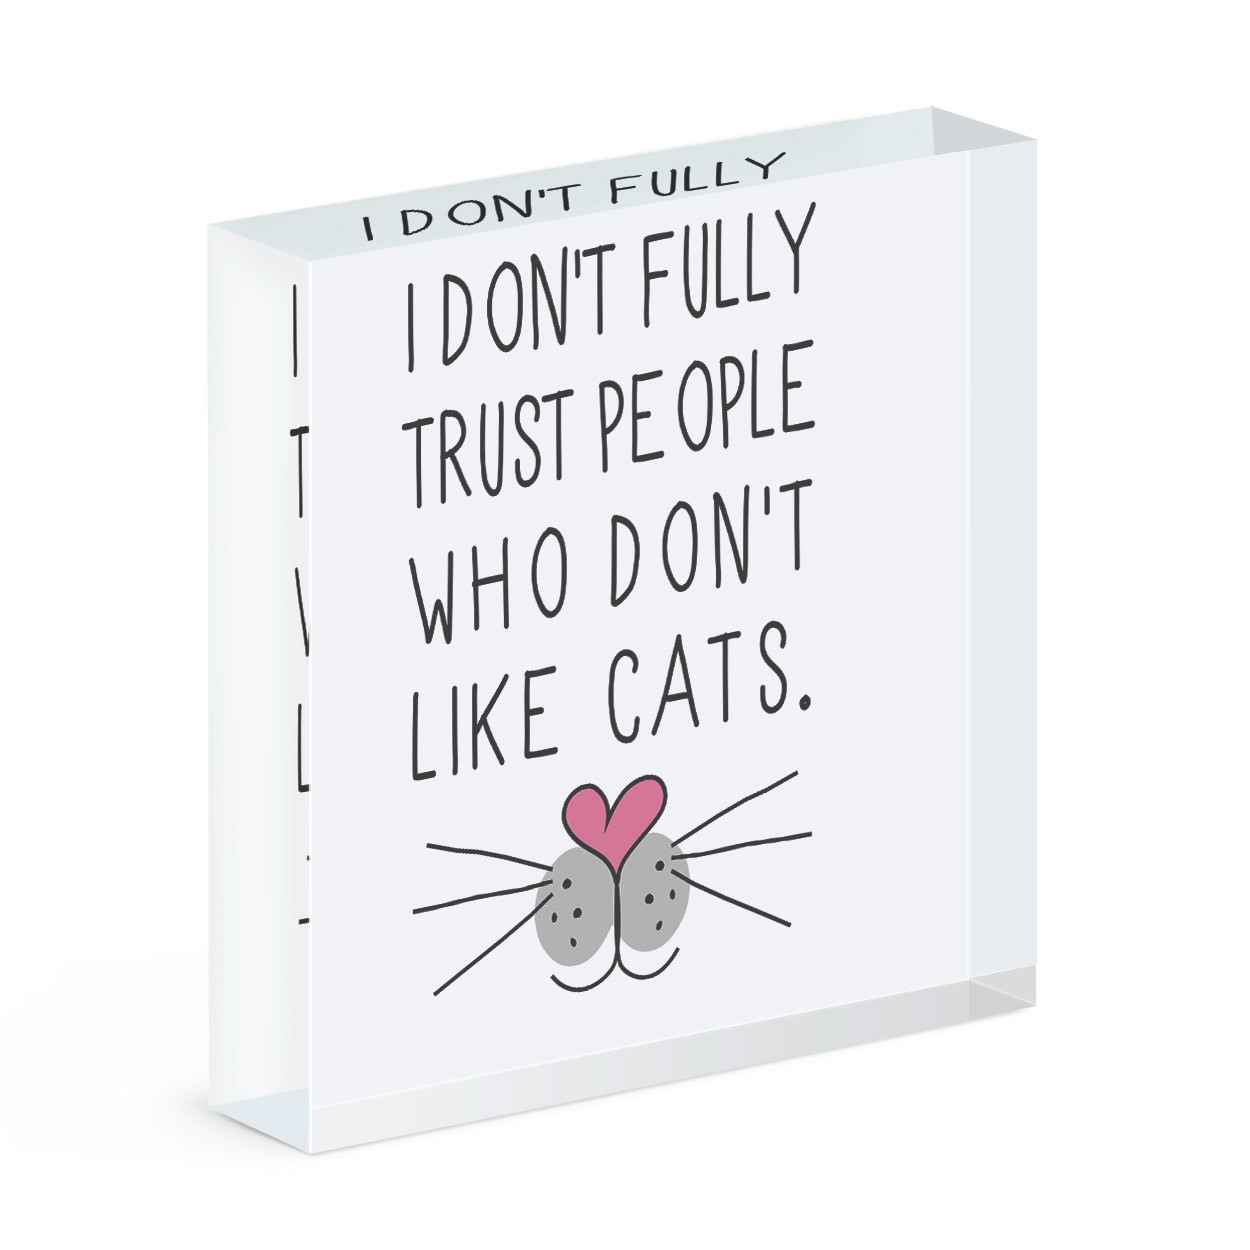 I Don't Fully Trust People Who Don't Like Cats Acrylic Block